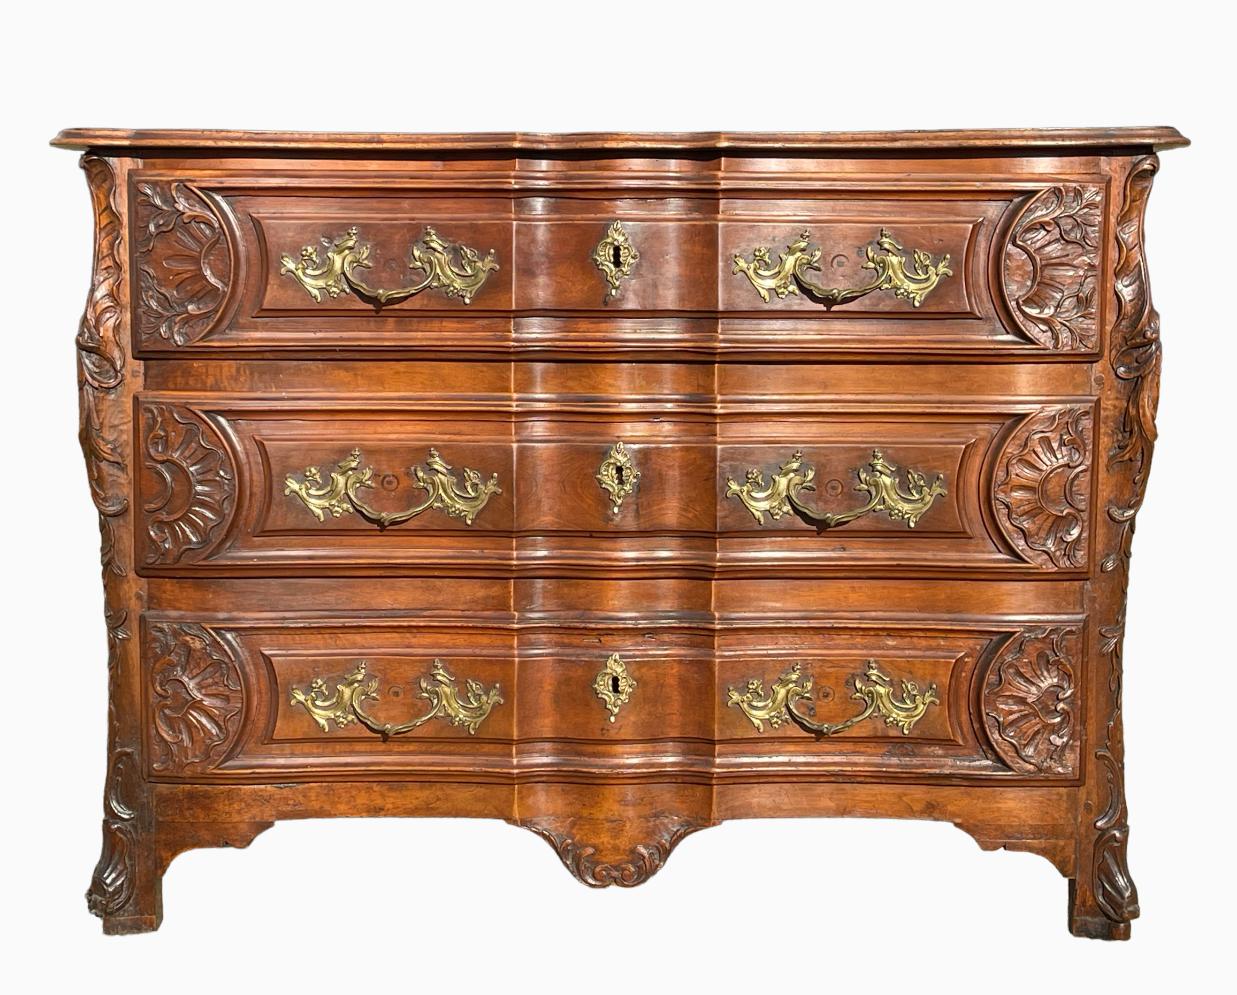 Superb Louis XV period carved walnut chest of drawers. It opens with three large curved crossbow drawers. Handles and keyholes in gilded bronze. Original pegged top. Lyonnais work dating from the 18th century, very beautifully made.
Note - some